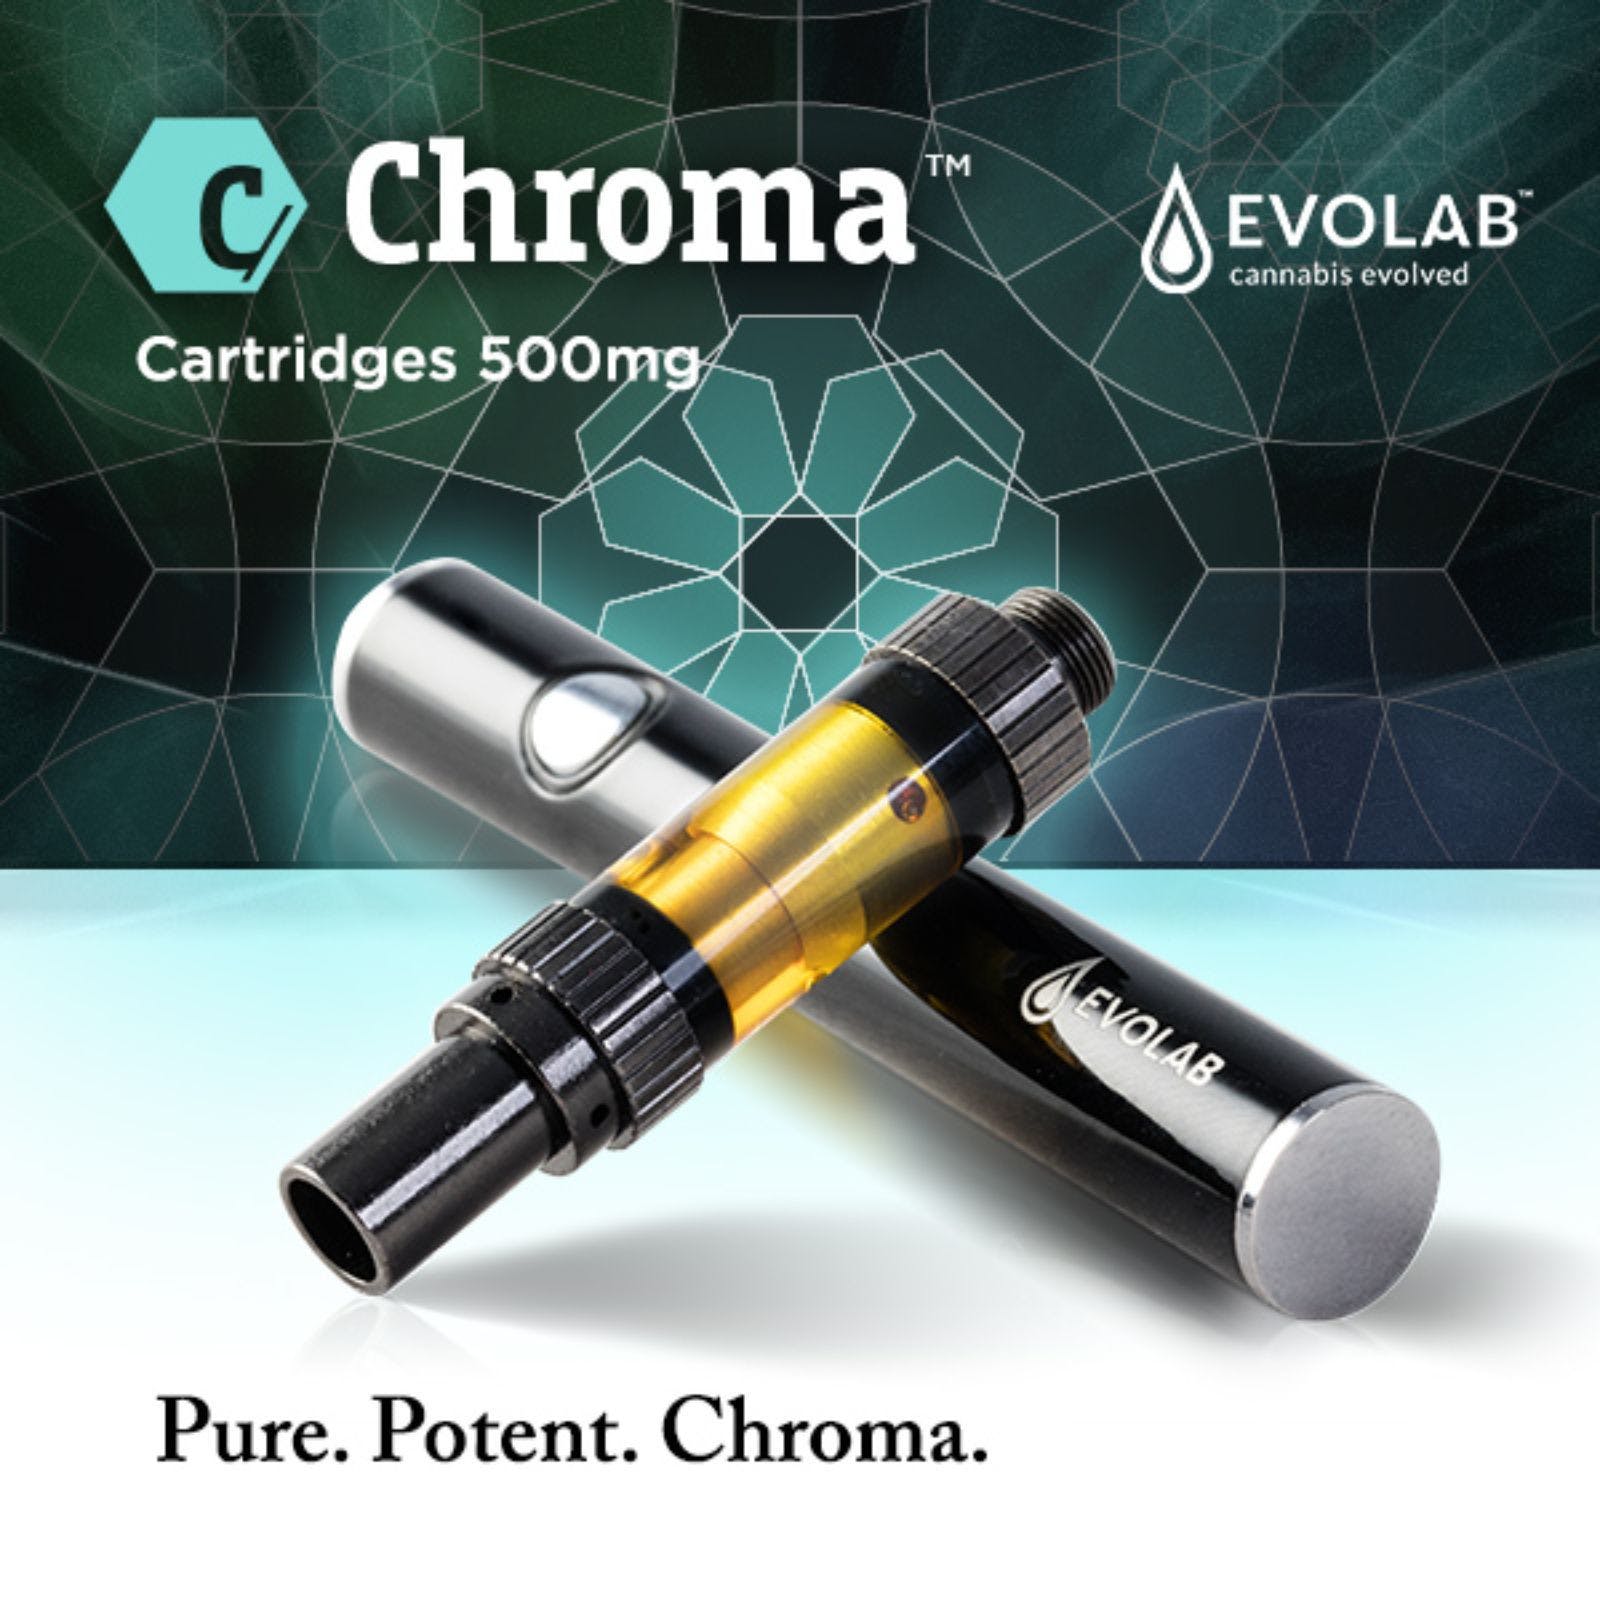 concentrate-evolabs-chroma-plus-500mg-cartridge-tax-included